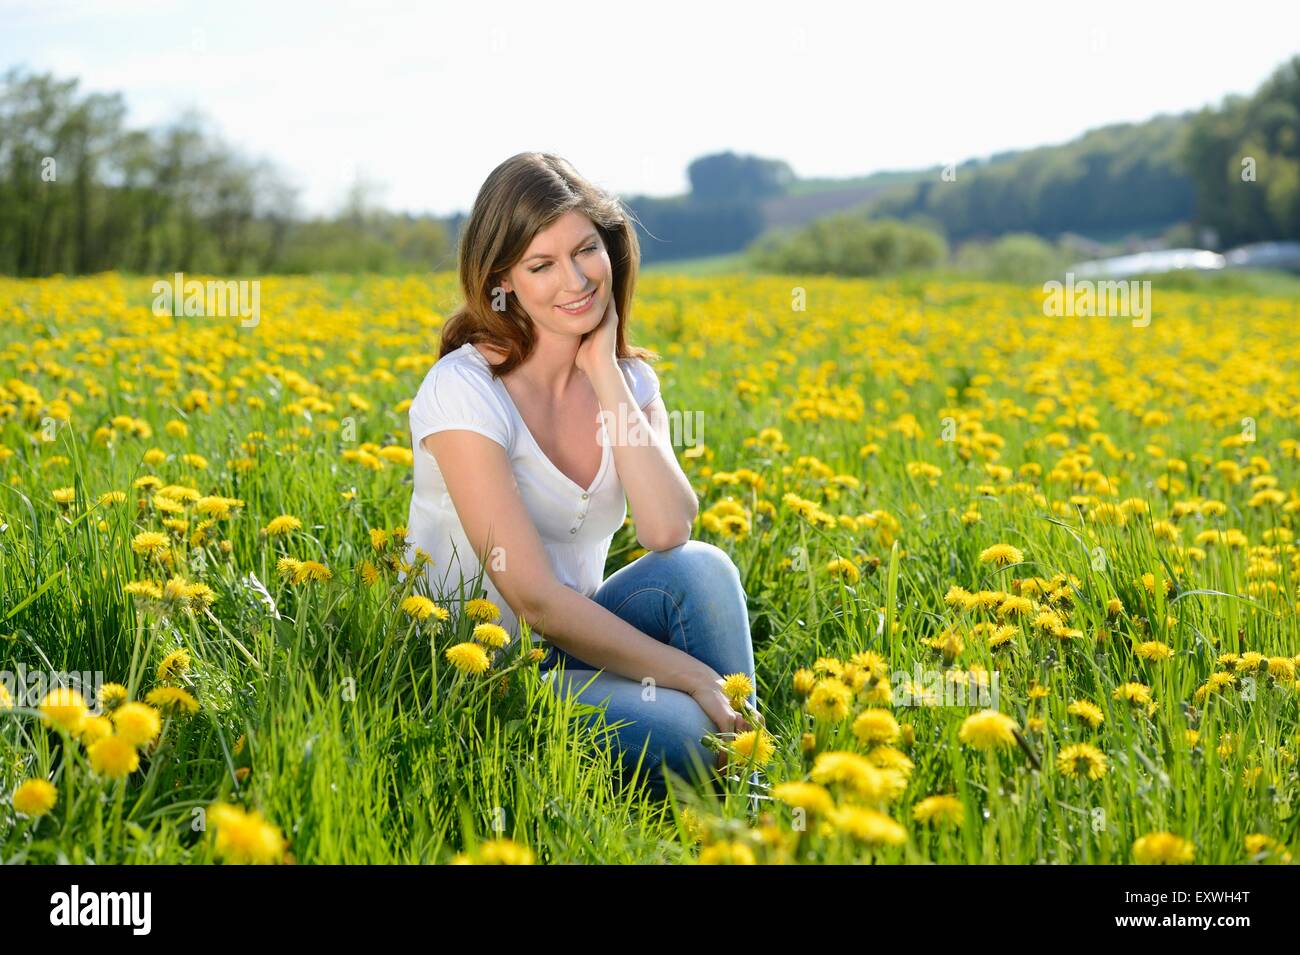 Young woman in a meadow, Bavaria, Germany, Europe Stock Photo